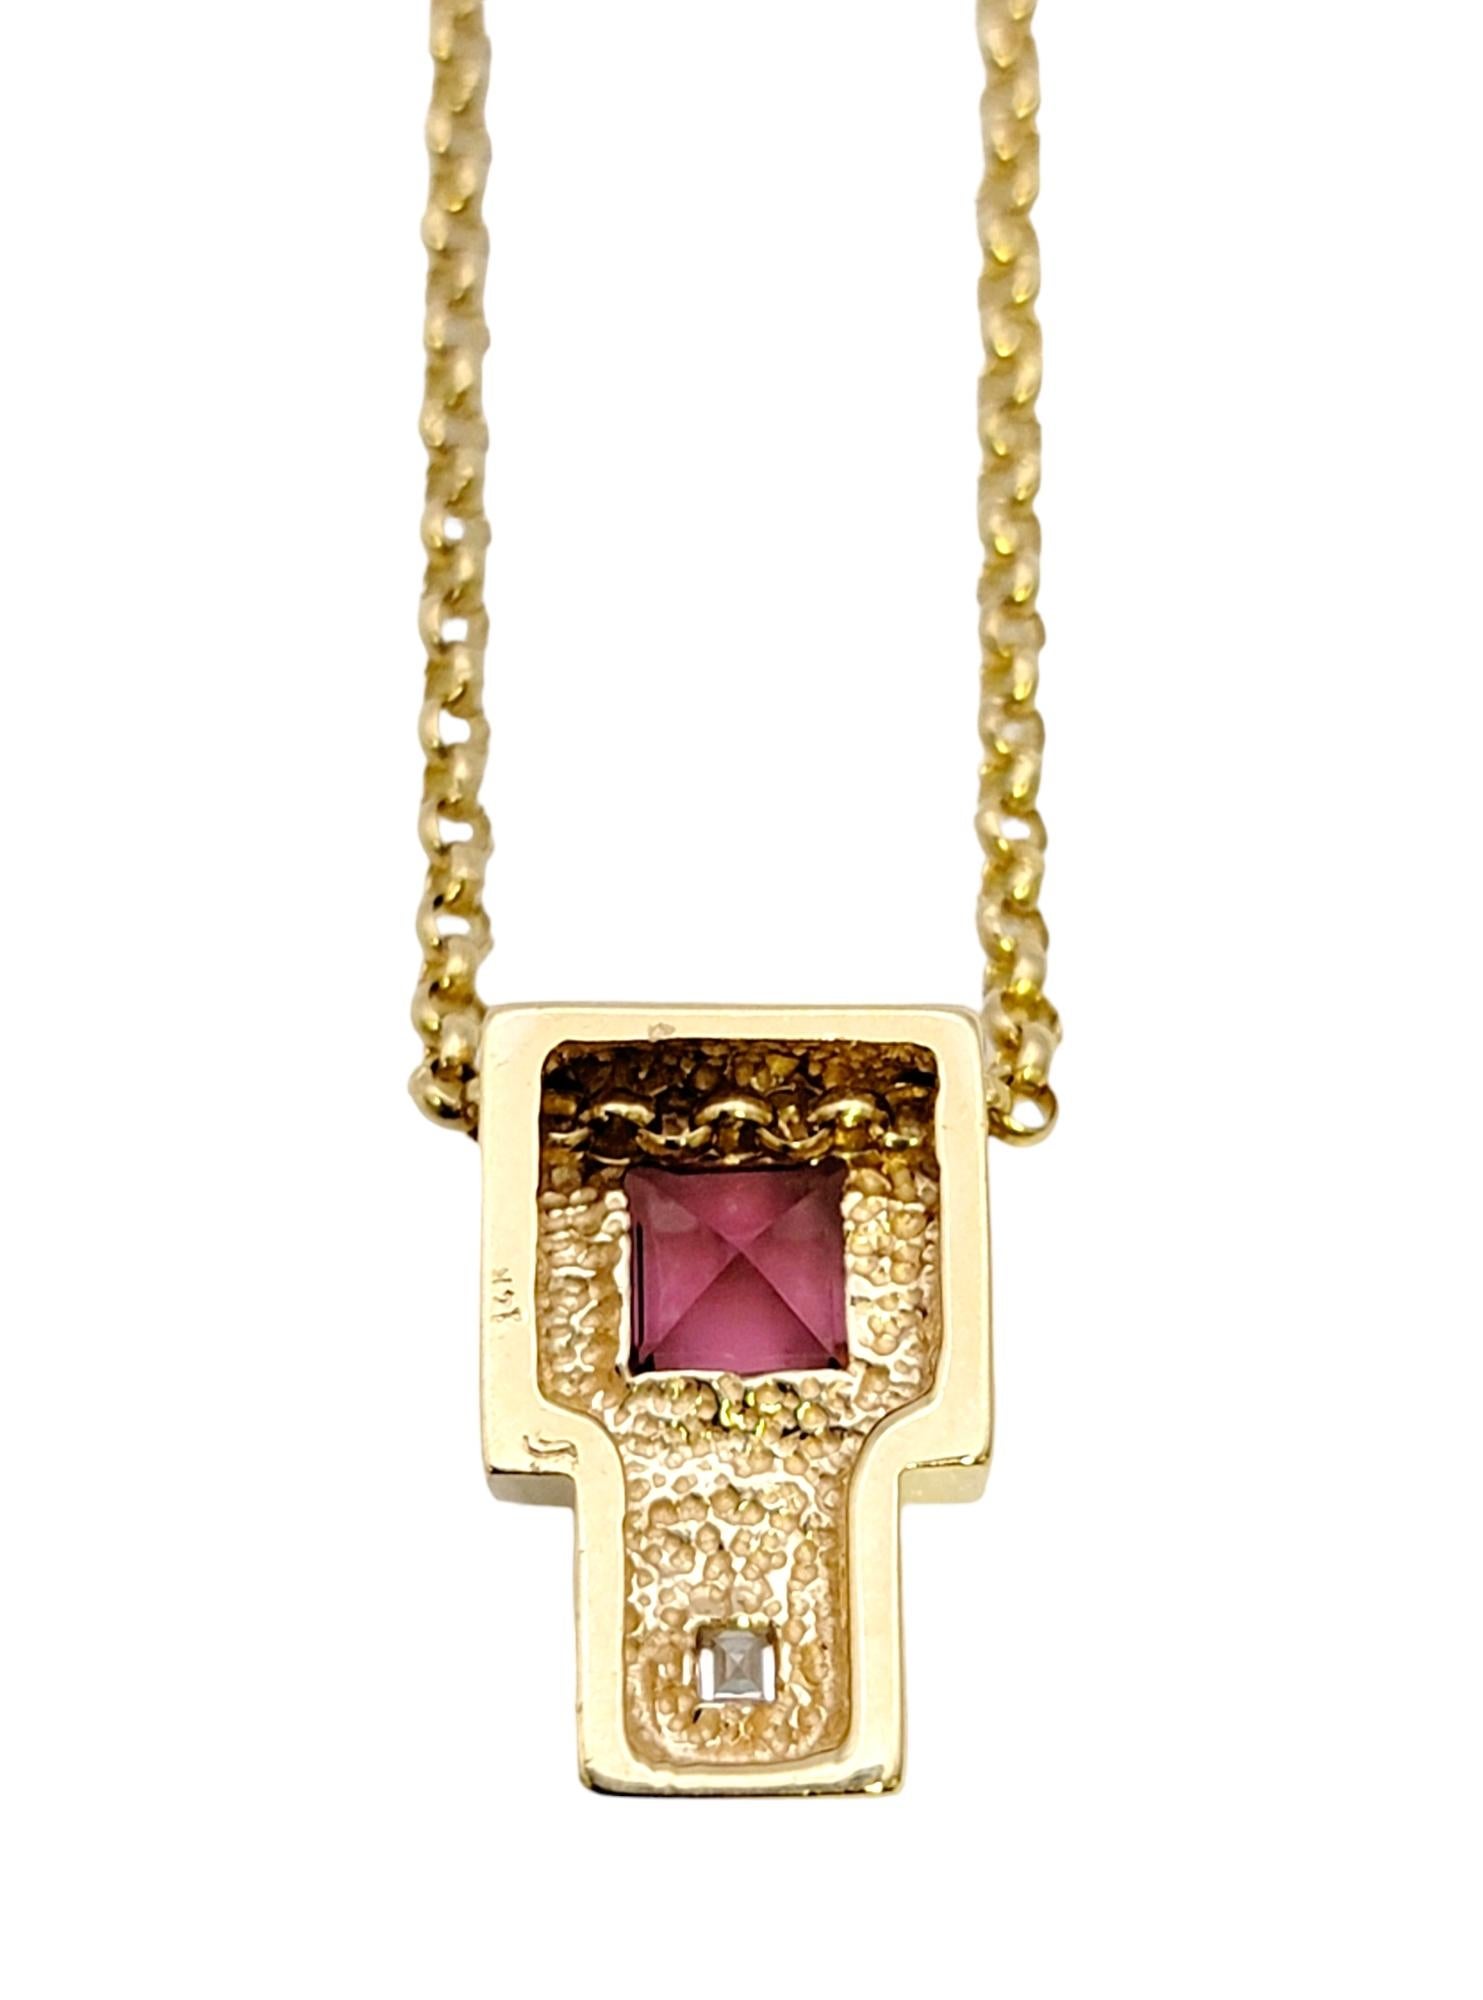 Contemporary Square Cut Pink Tourmaline and Diamond Yellow Gold Pendant Necklace For Sale 5